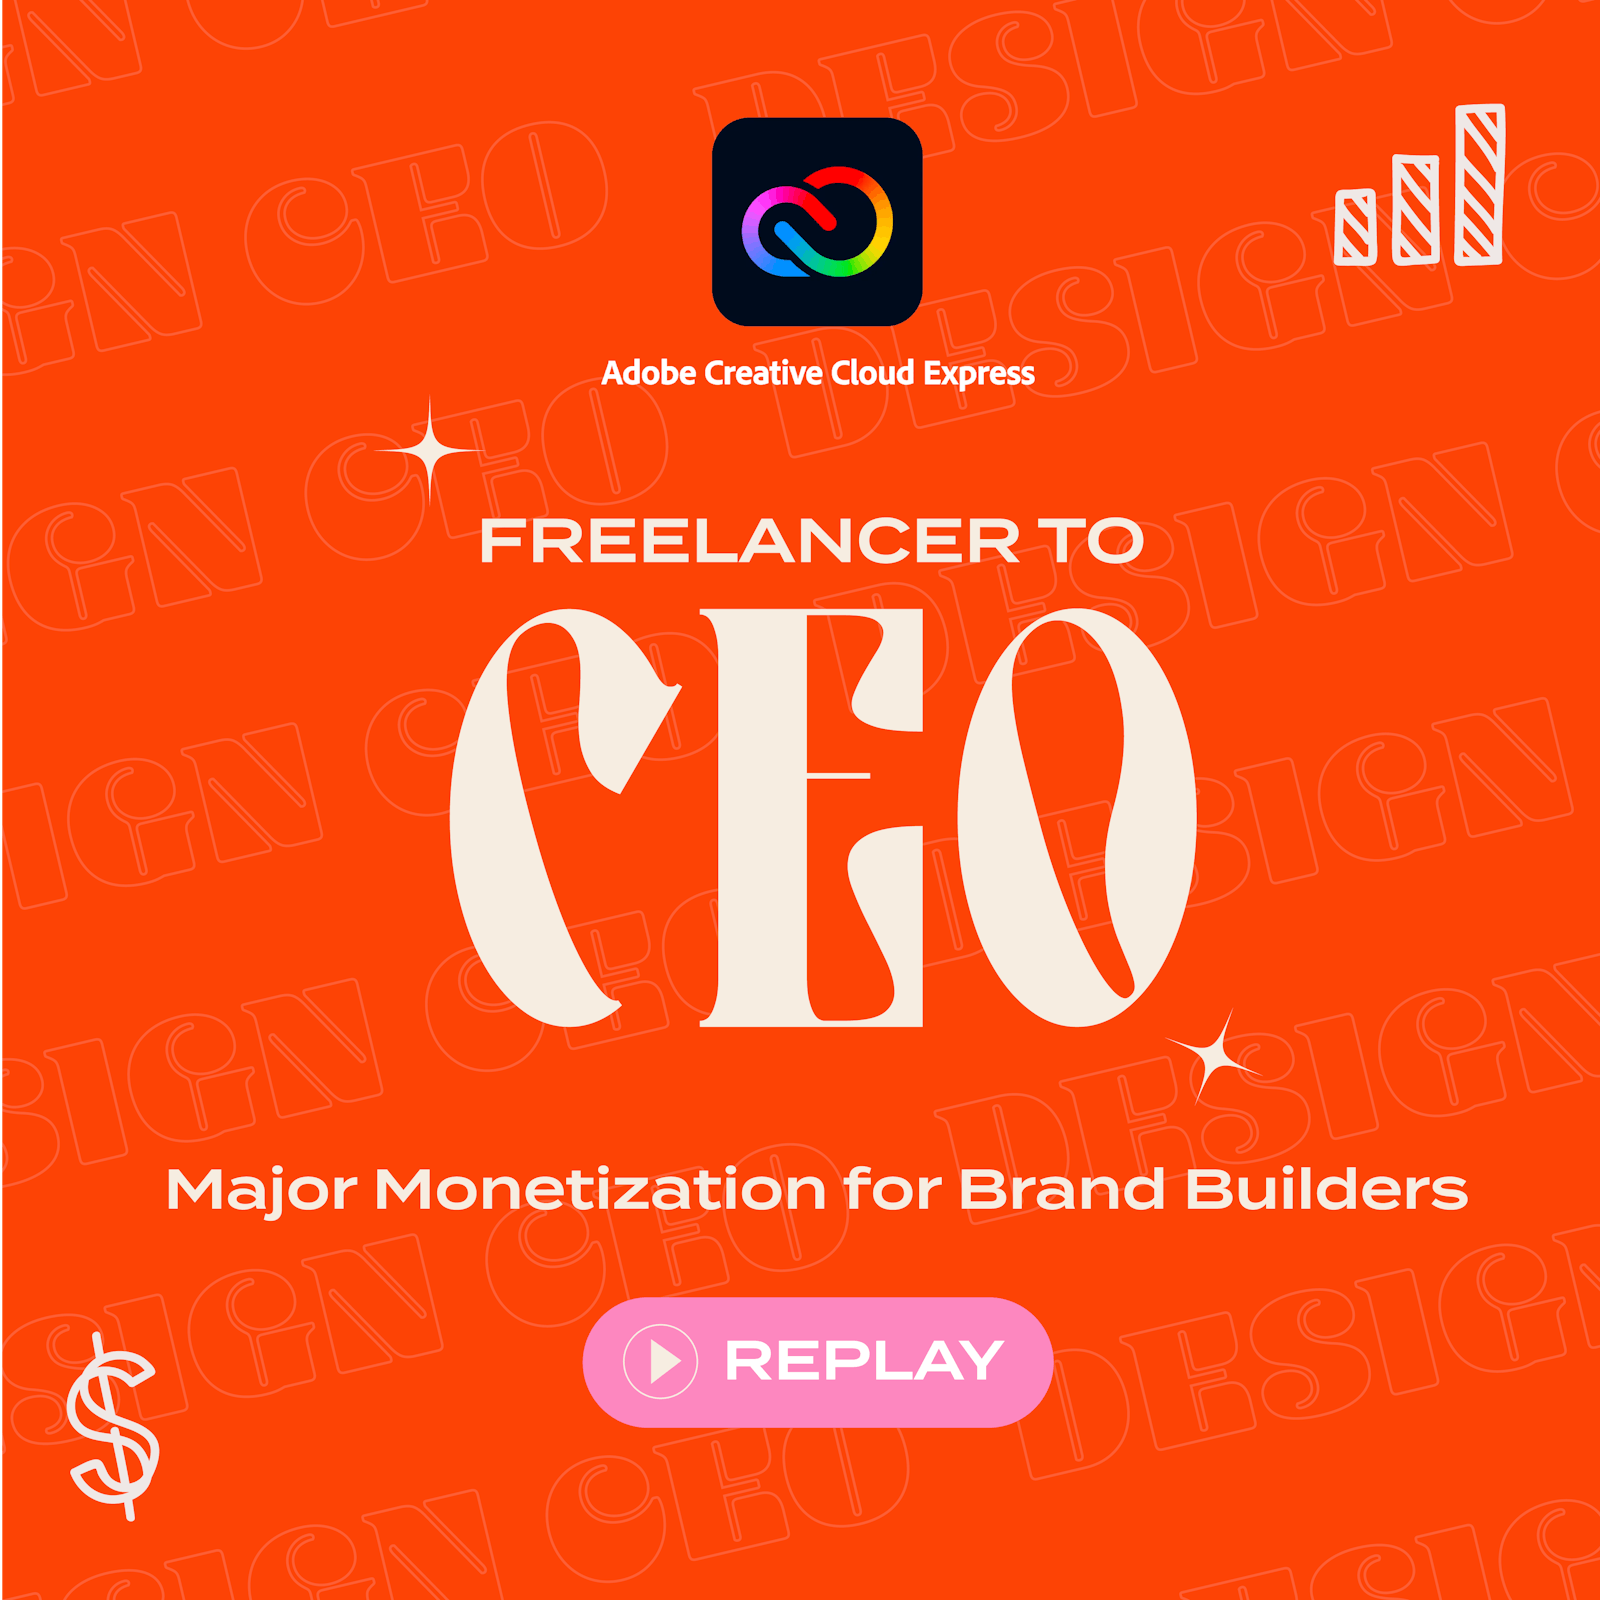 Freelancer to CEO: Major Monetization for Brand Builders 🔁